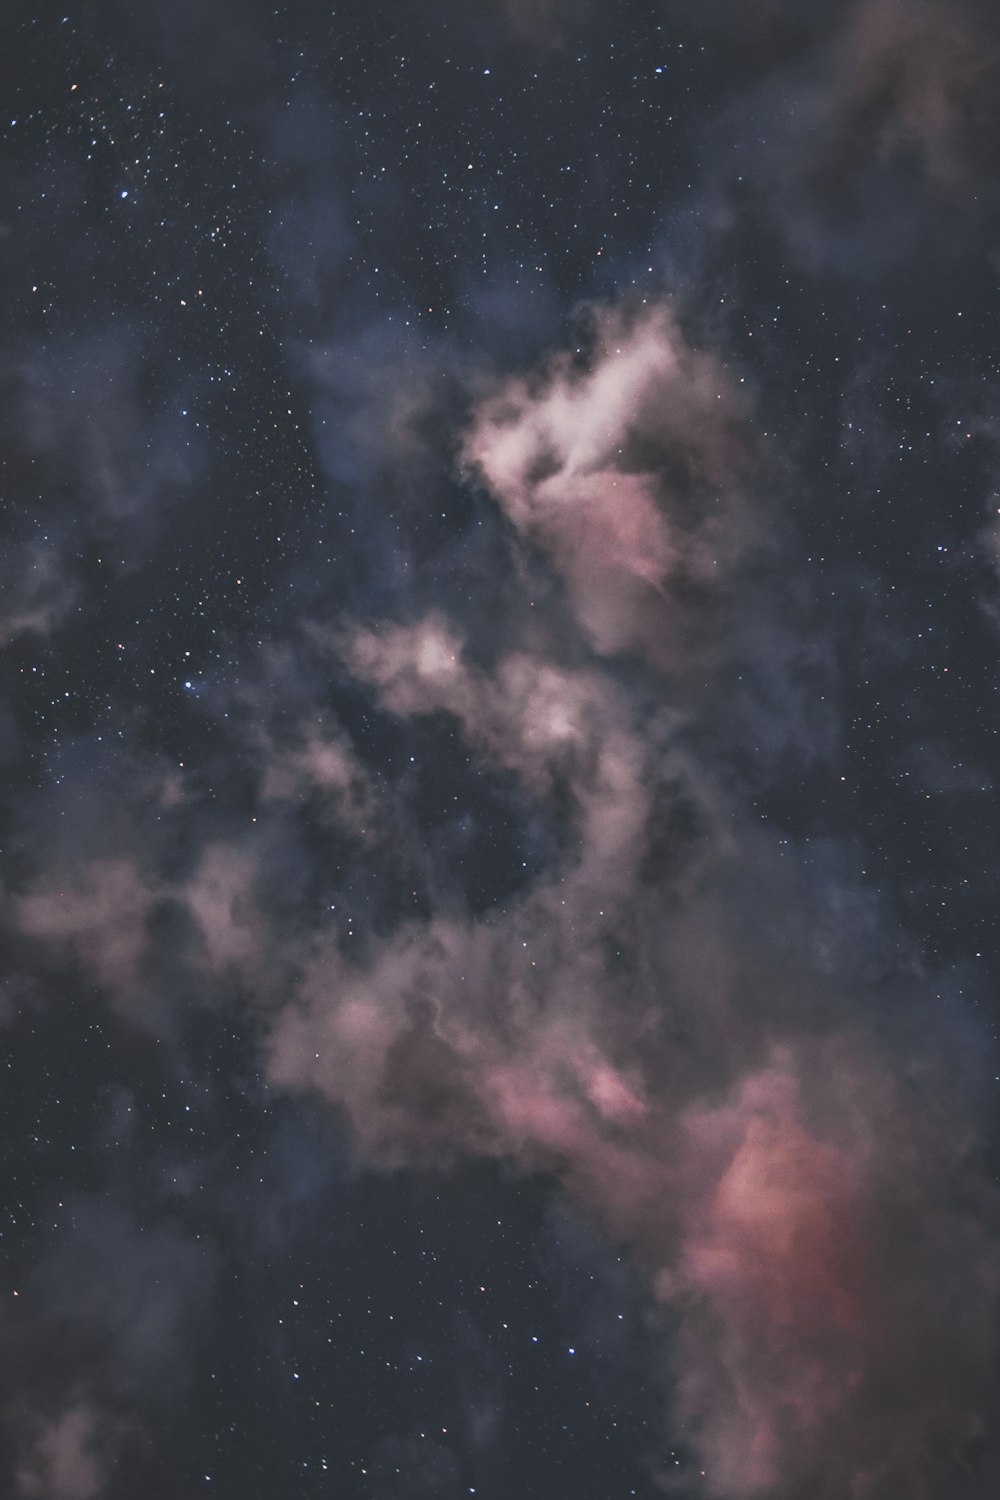 the night sky is filled with stars and clouds